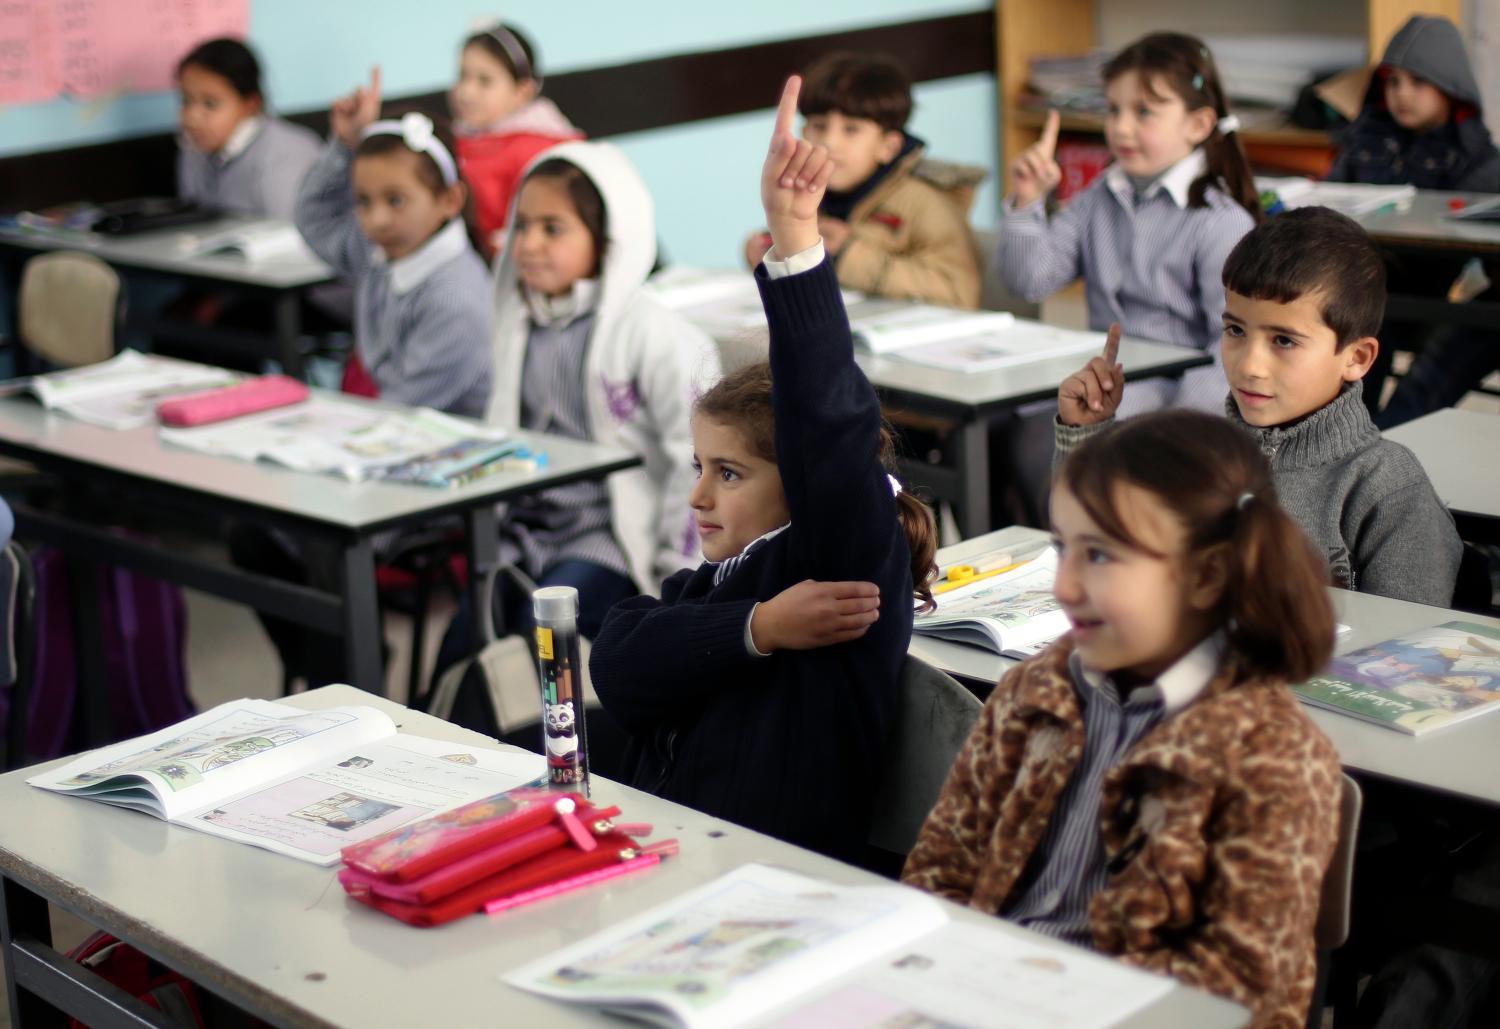 Palestinian first-graders sit with their schoolbook